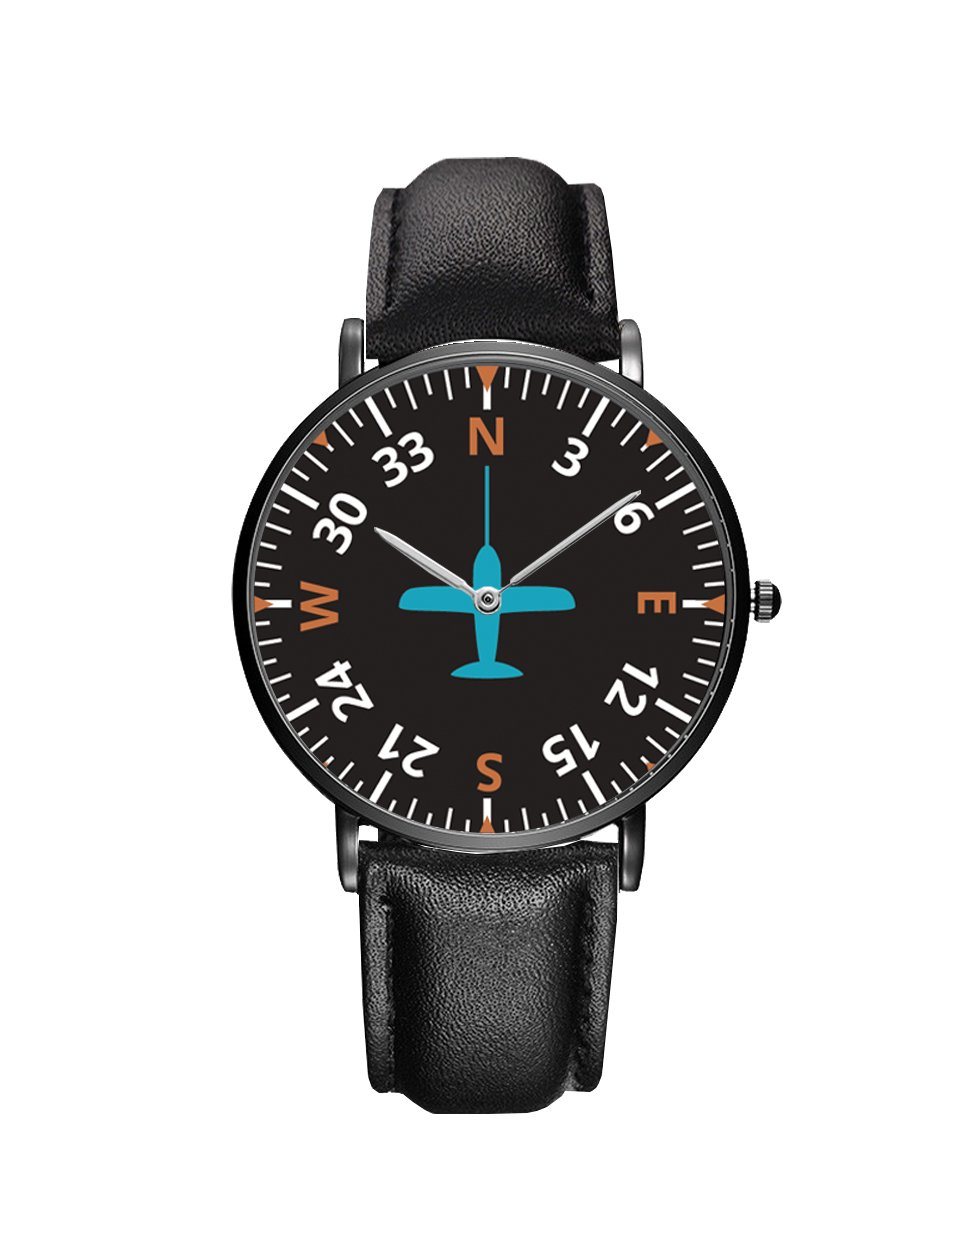 Airplane Instrument Series (Heading2) Leather Strap Watches Pilot Eyes Store Black & Black Leather Strap 